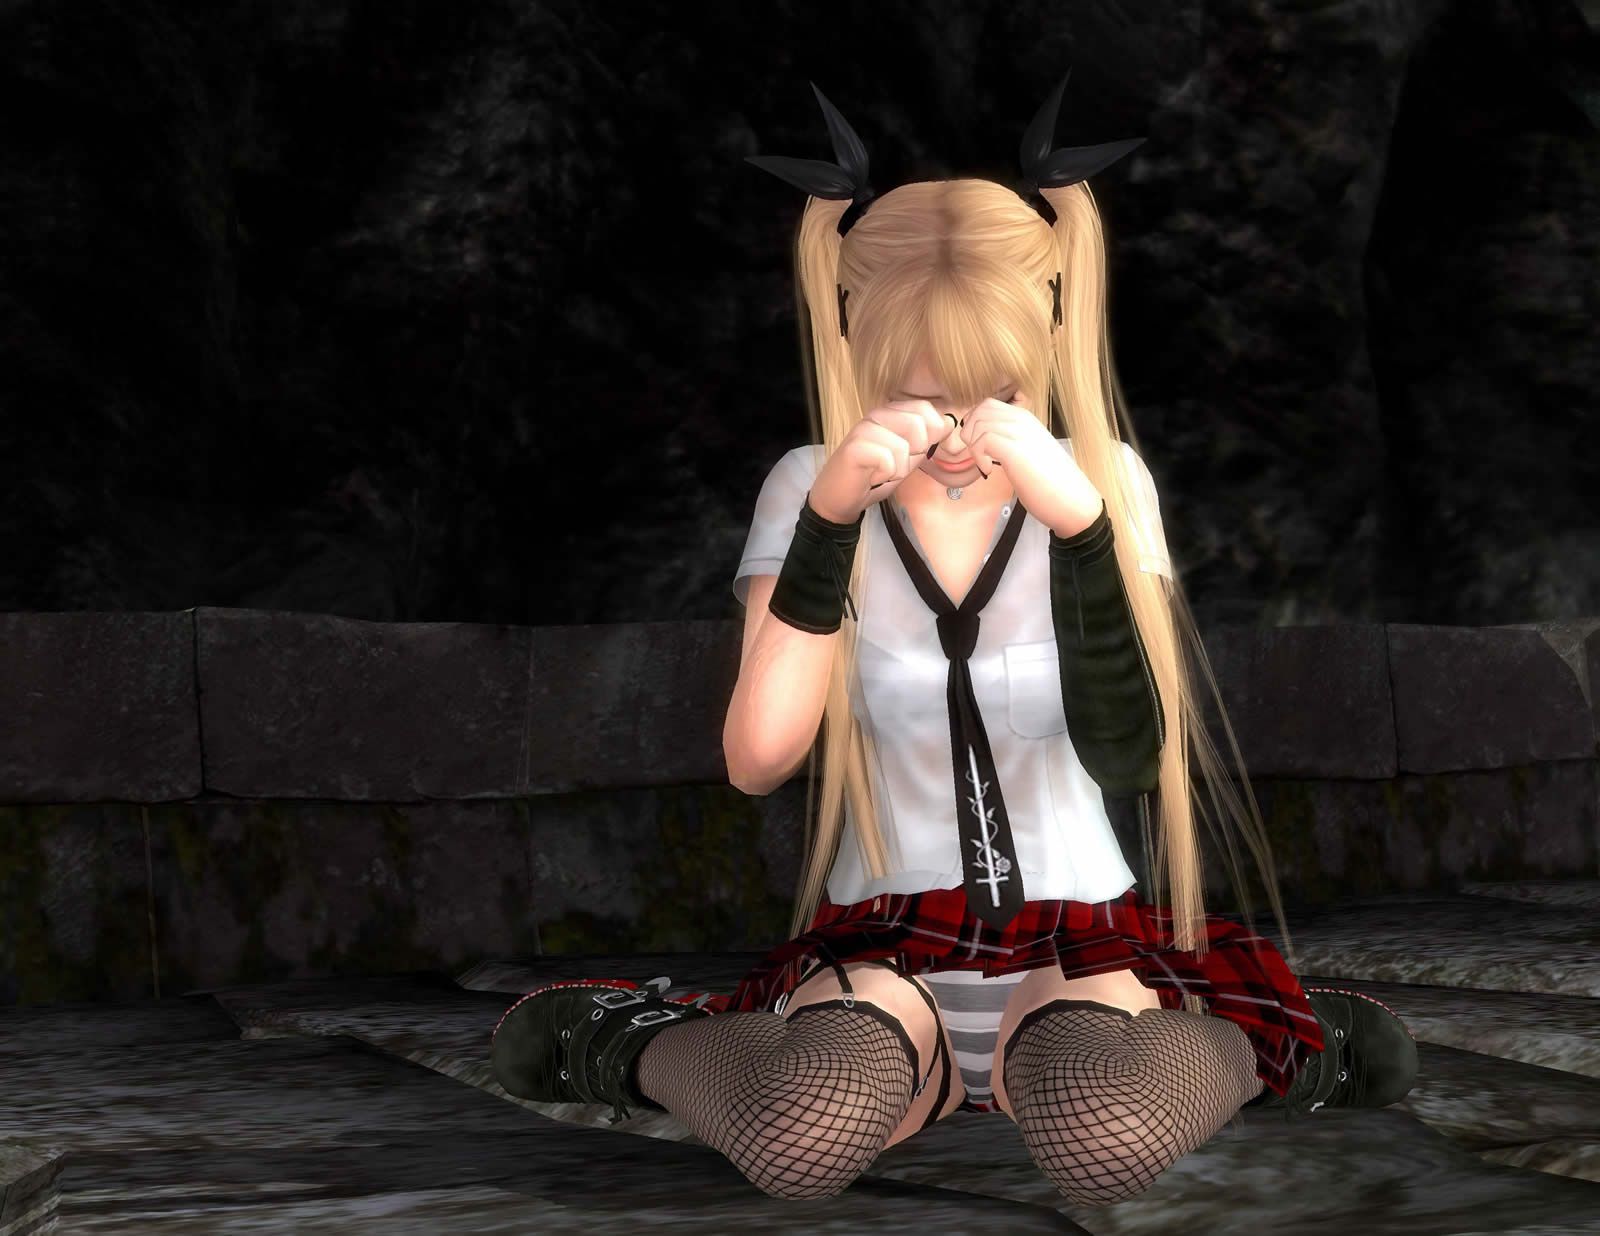 Marie Rose, a martial artist who was born only to be dressed in a lewd way, wwwwwww 6